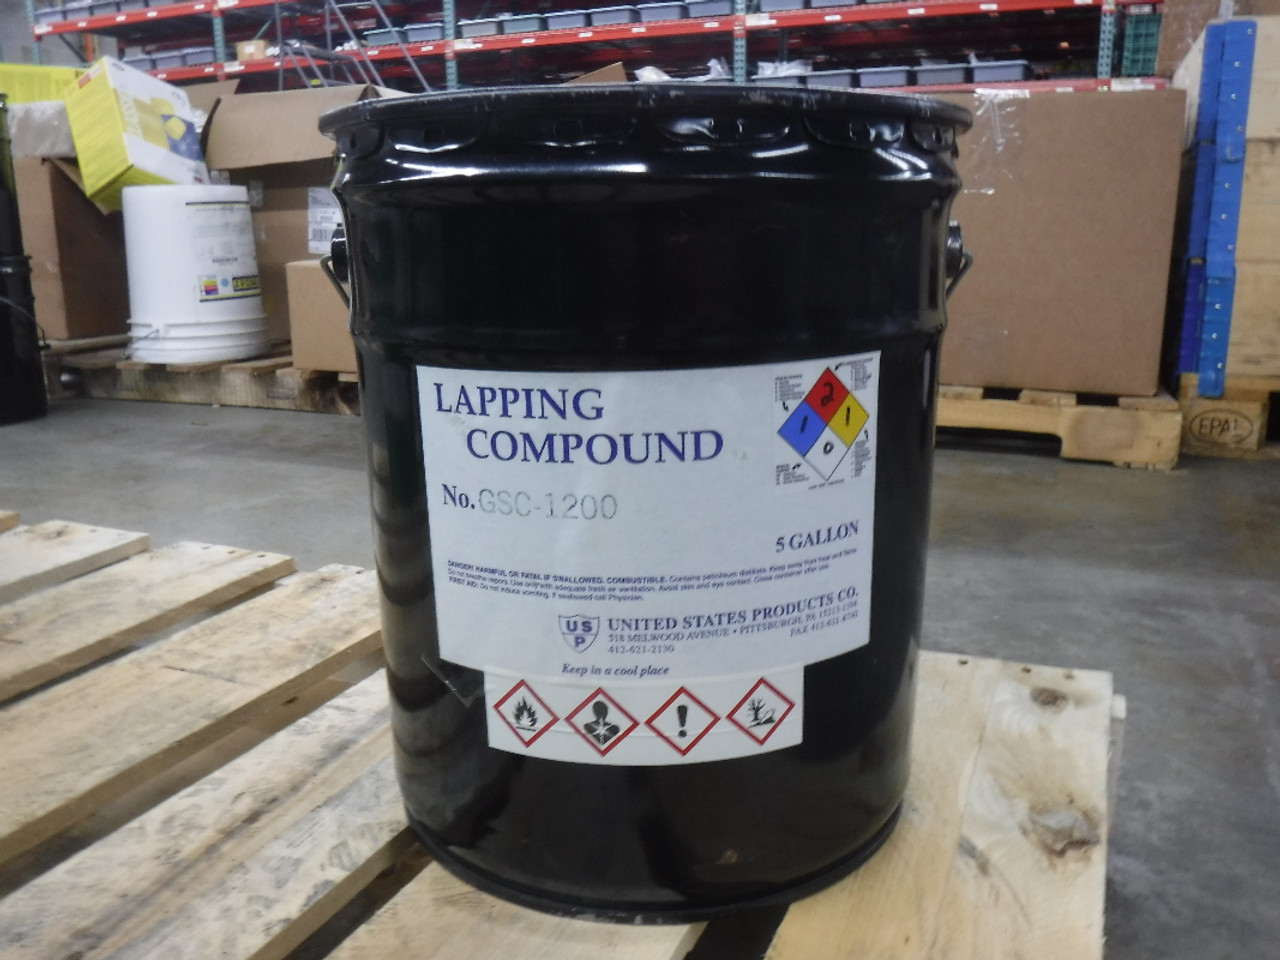 UNITED STATES PRODUCTS CO. Crystolon Lapping Compound 5 Gallon GSC-1200 -  Superior Machine & Tool